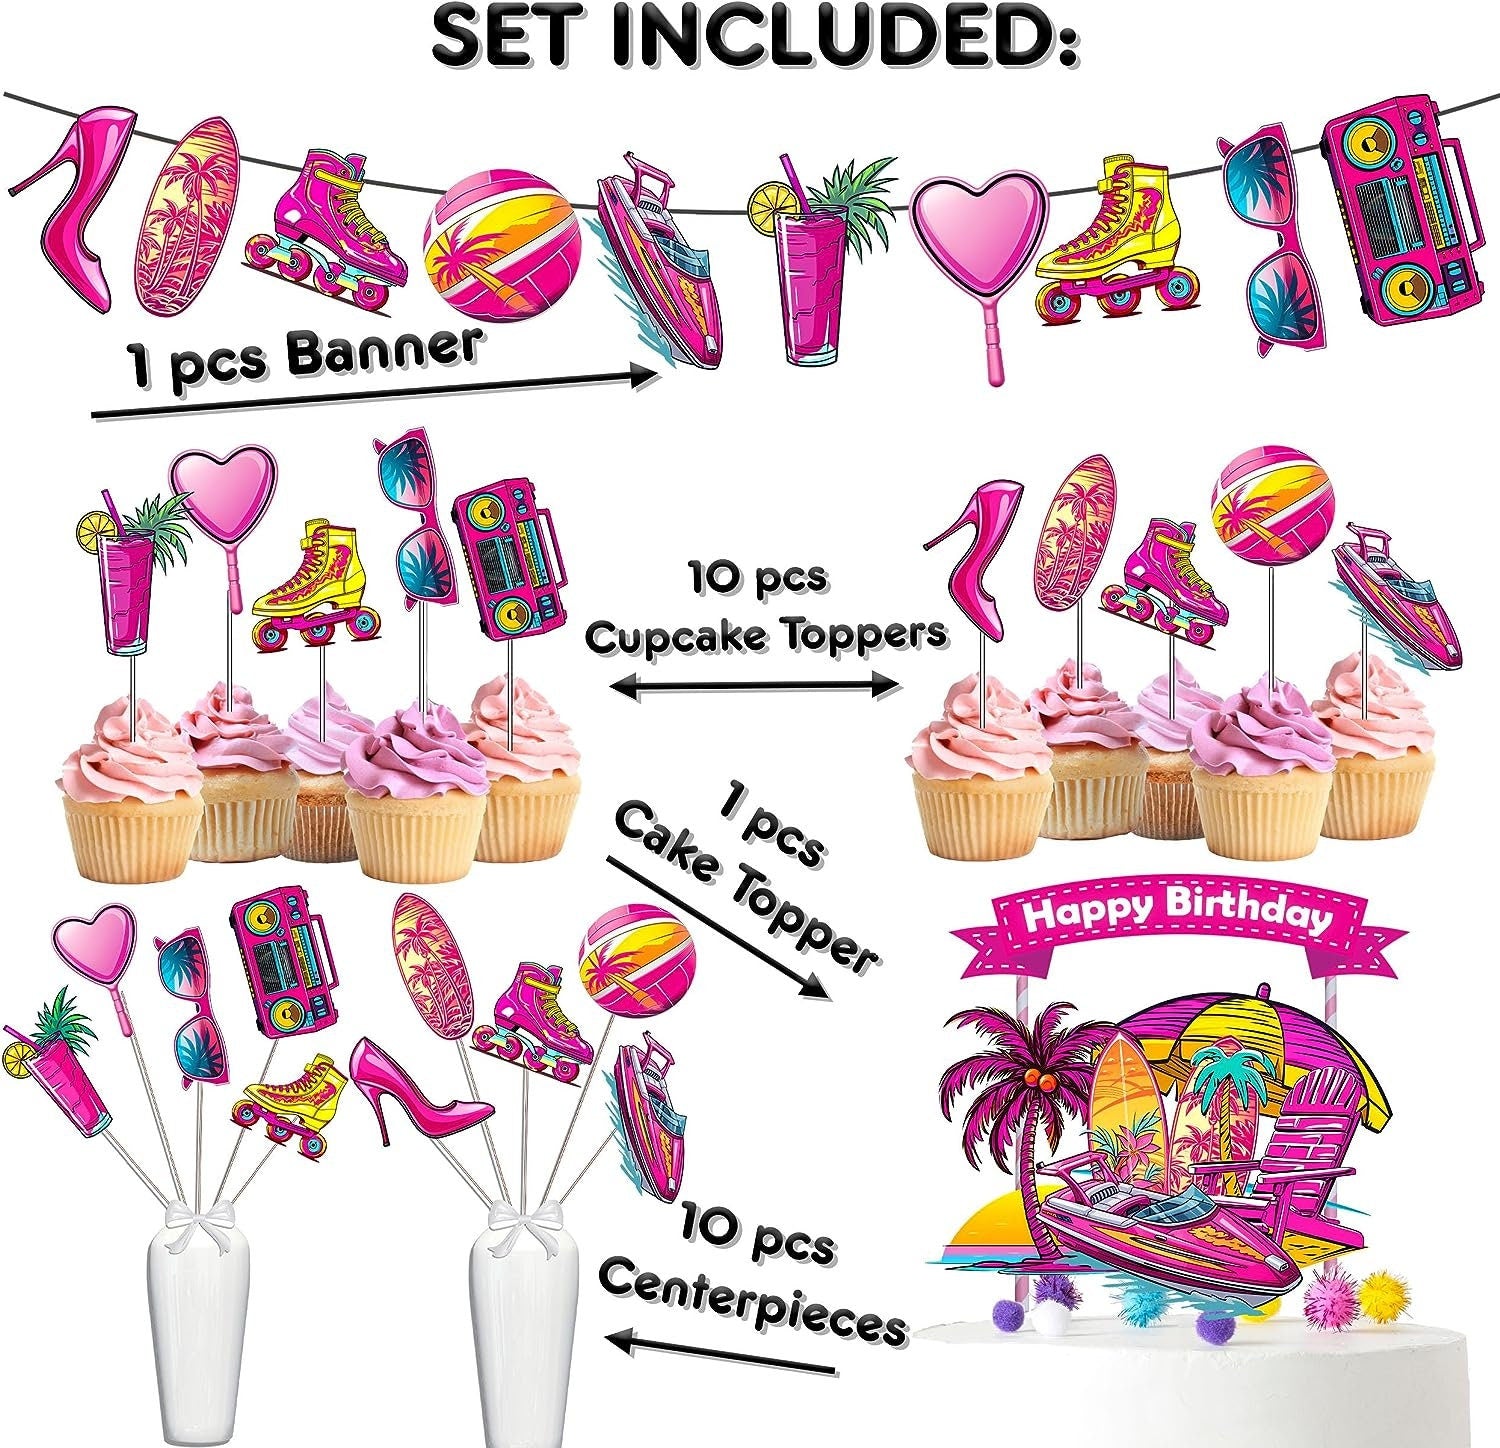 Retro Chic Pink Doll Birthday Party Decor Set - Vibrant Cake Topper, Cupcake Toppers, Centerpieces, & Banner - Celebrate in Style with a Vintage Vibe